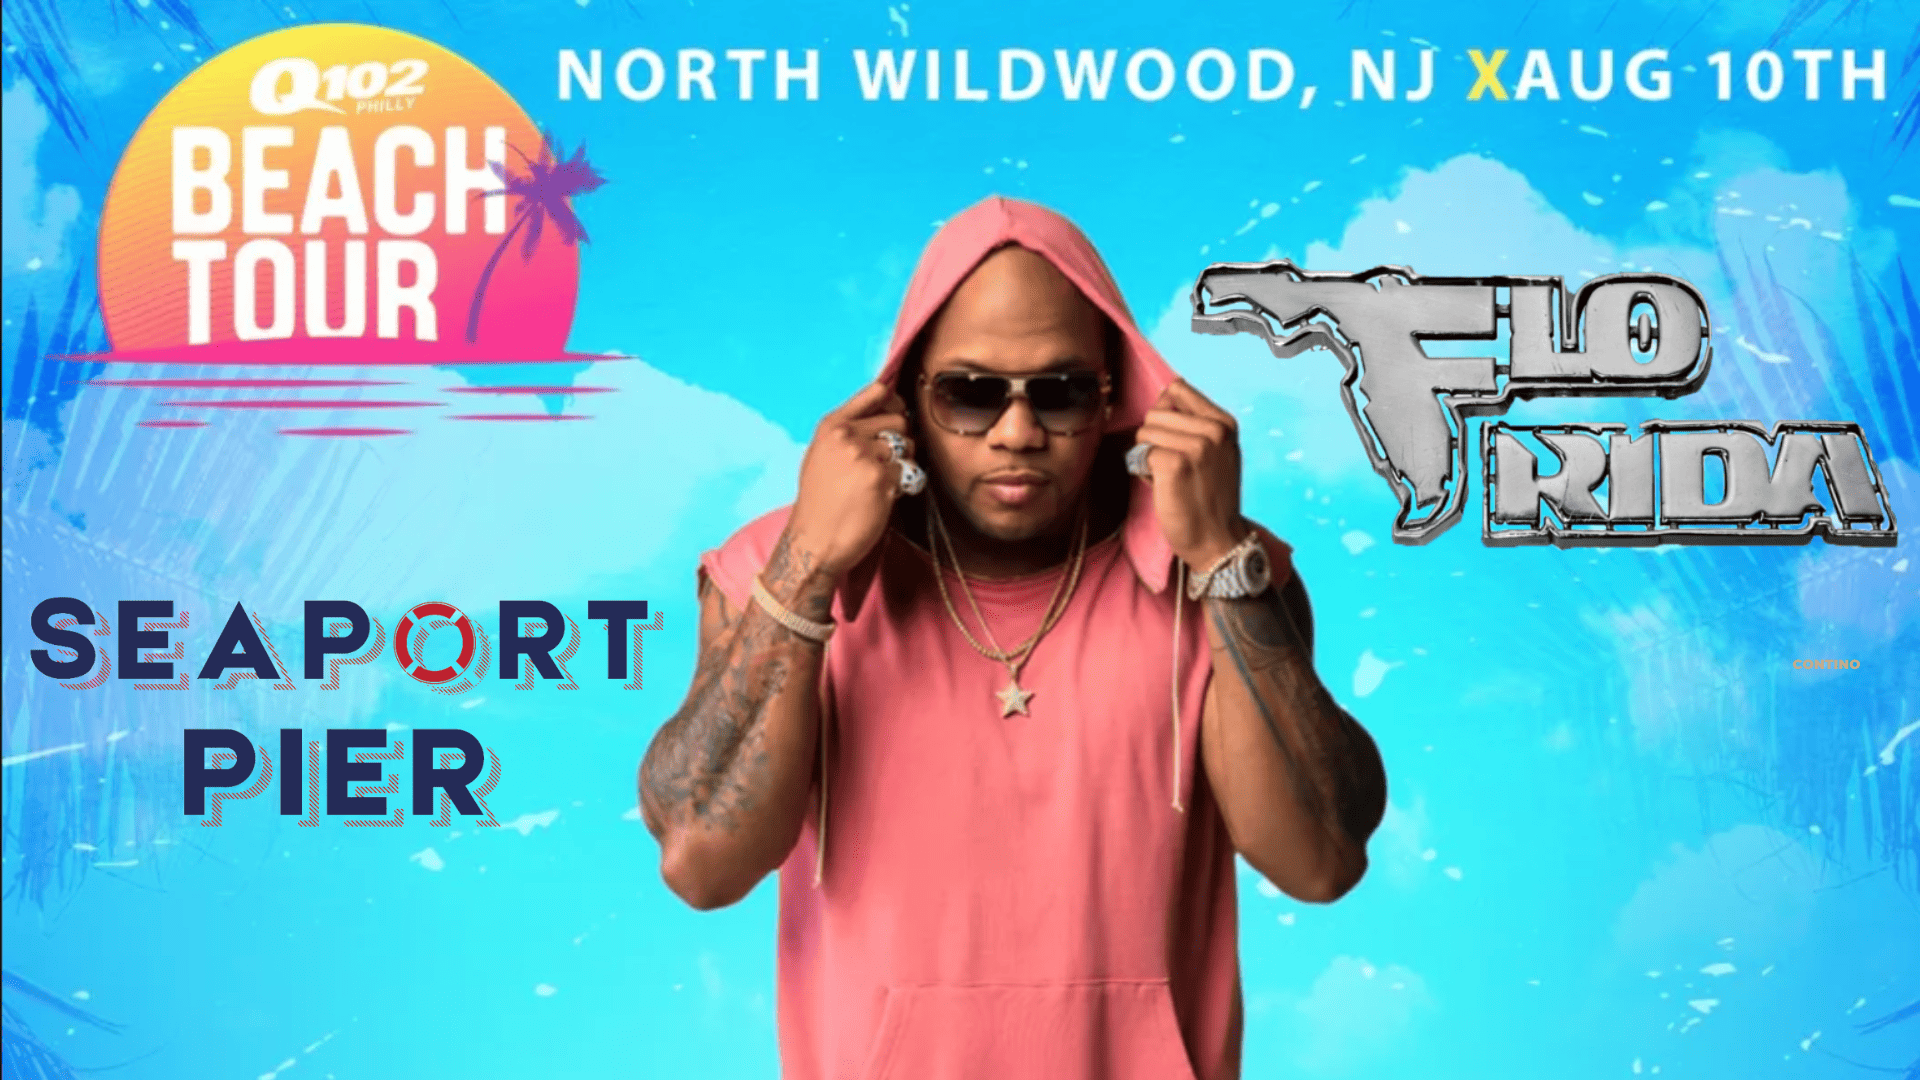 Rapper Flo Rida Is Coming to North Wildwood